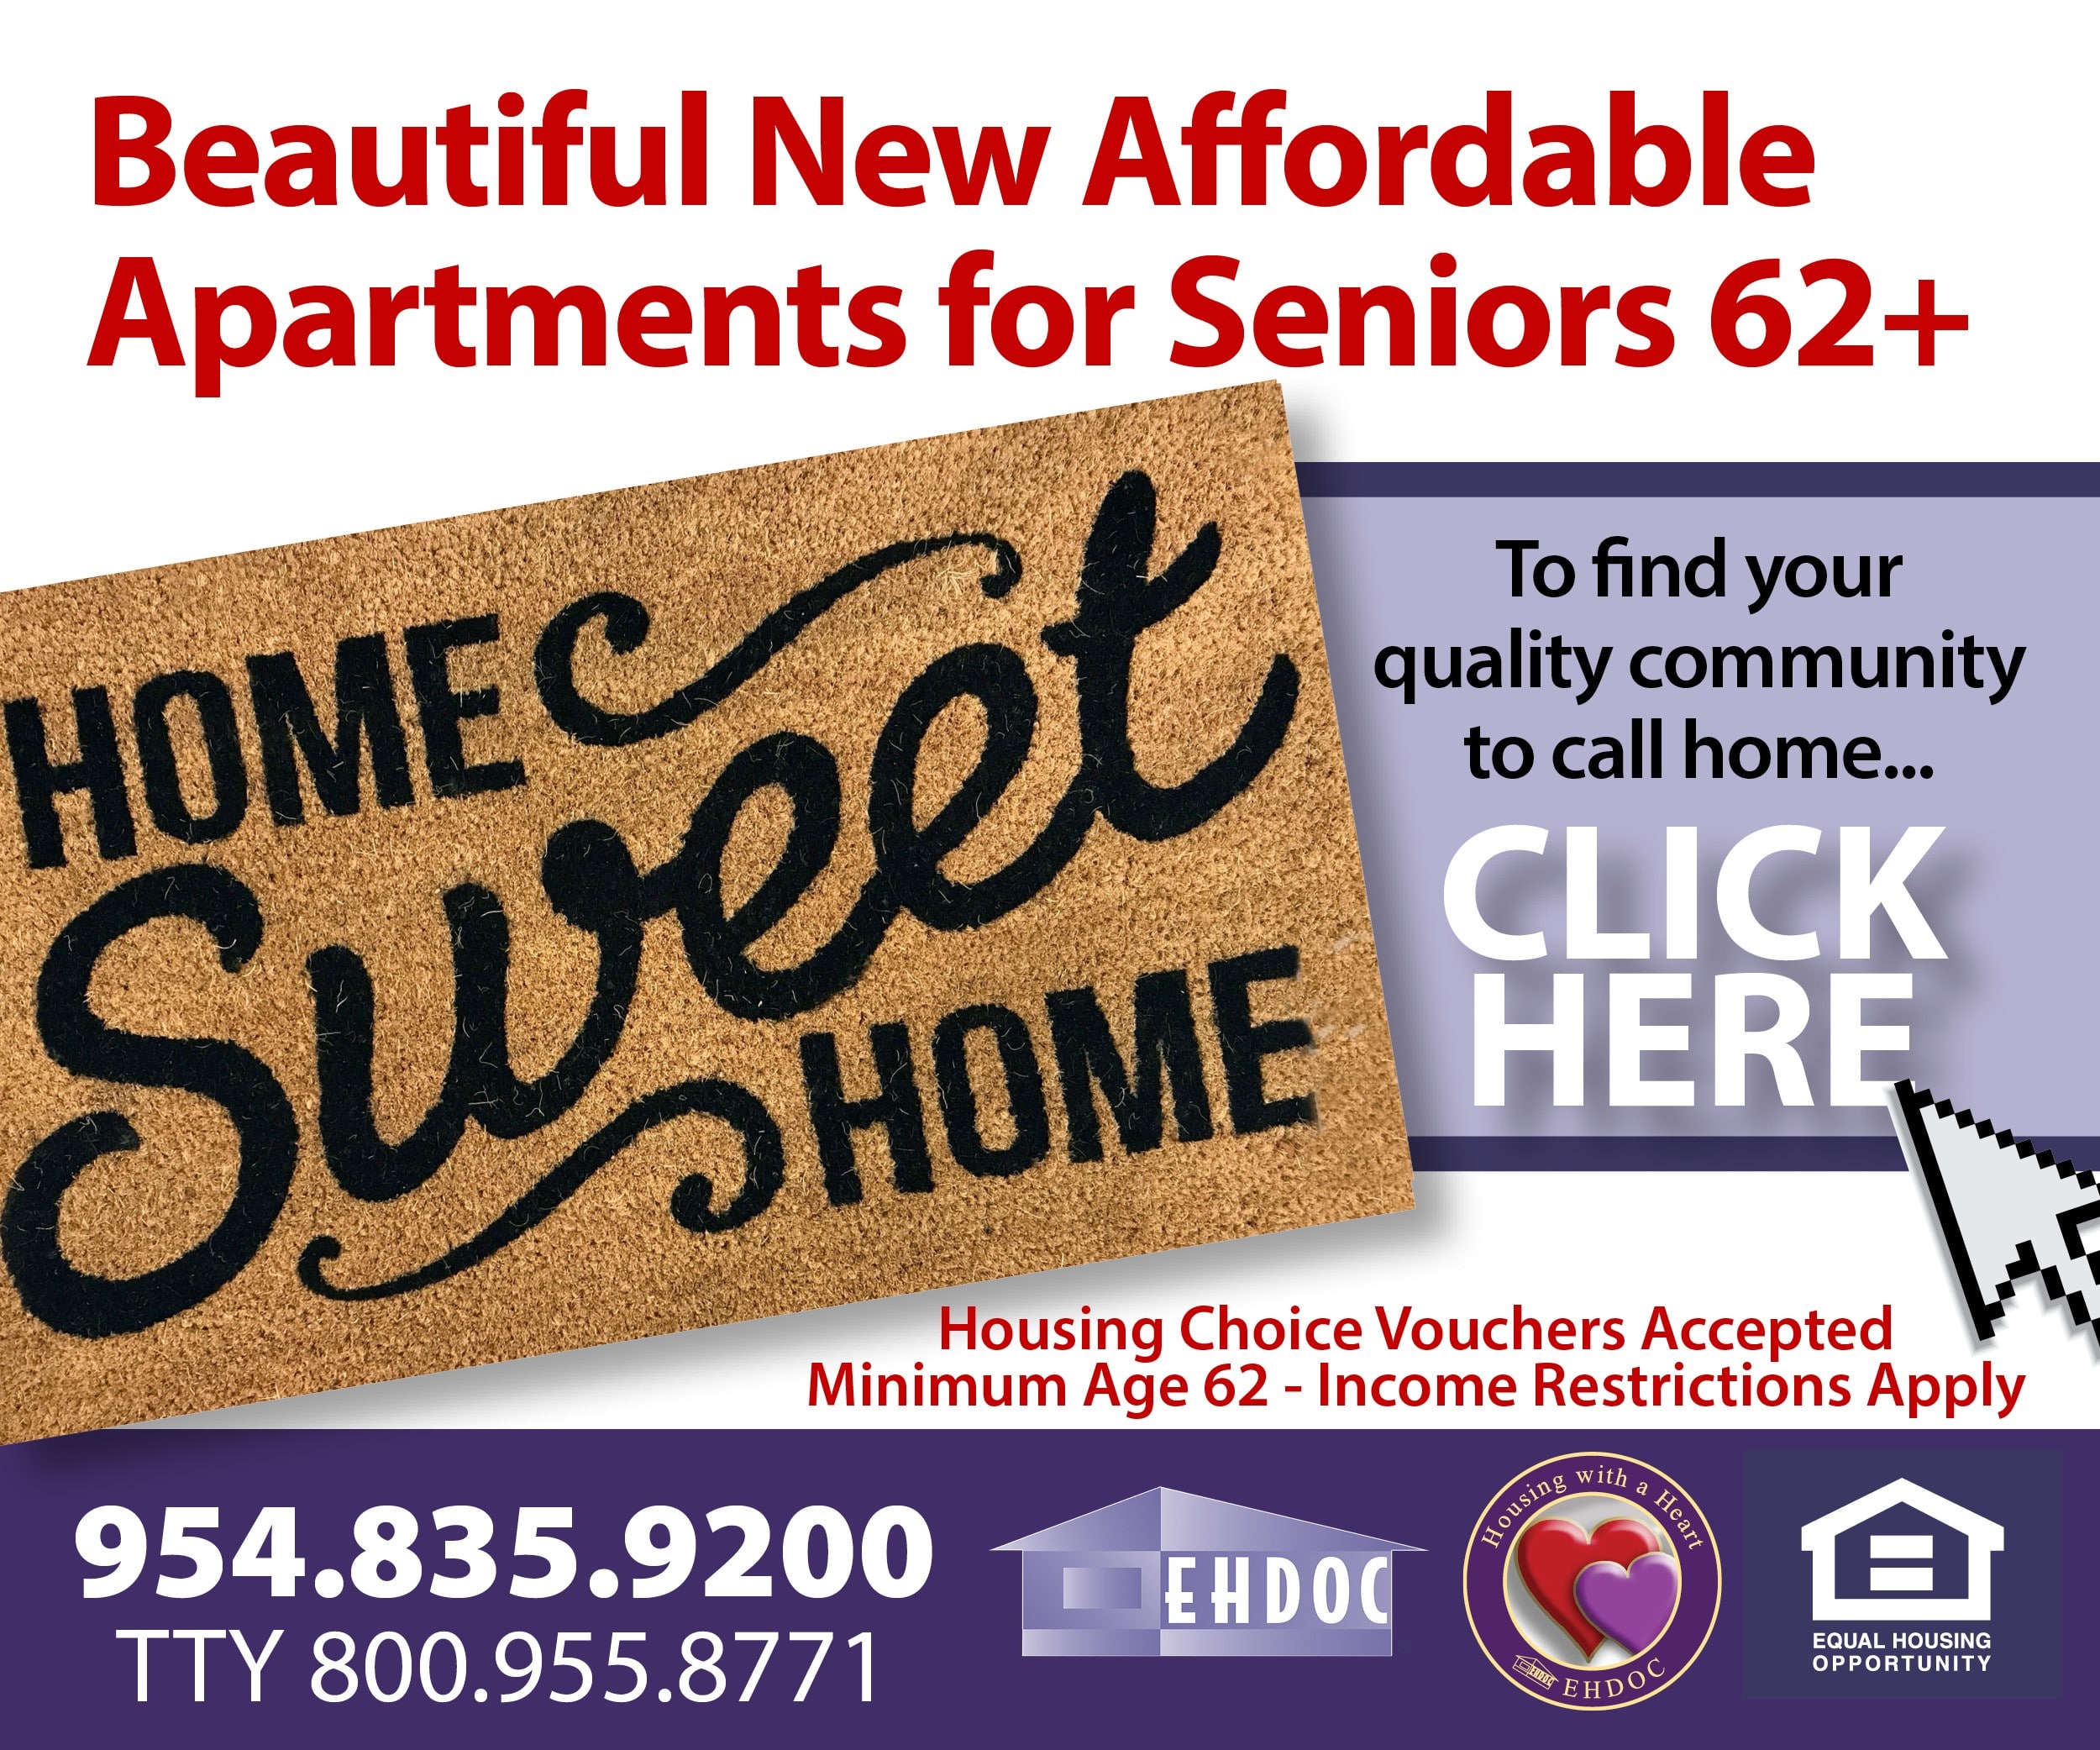 Beautiful Affordable Apartments for Seniors 62+